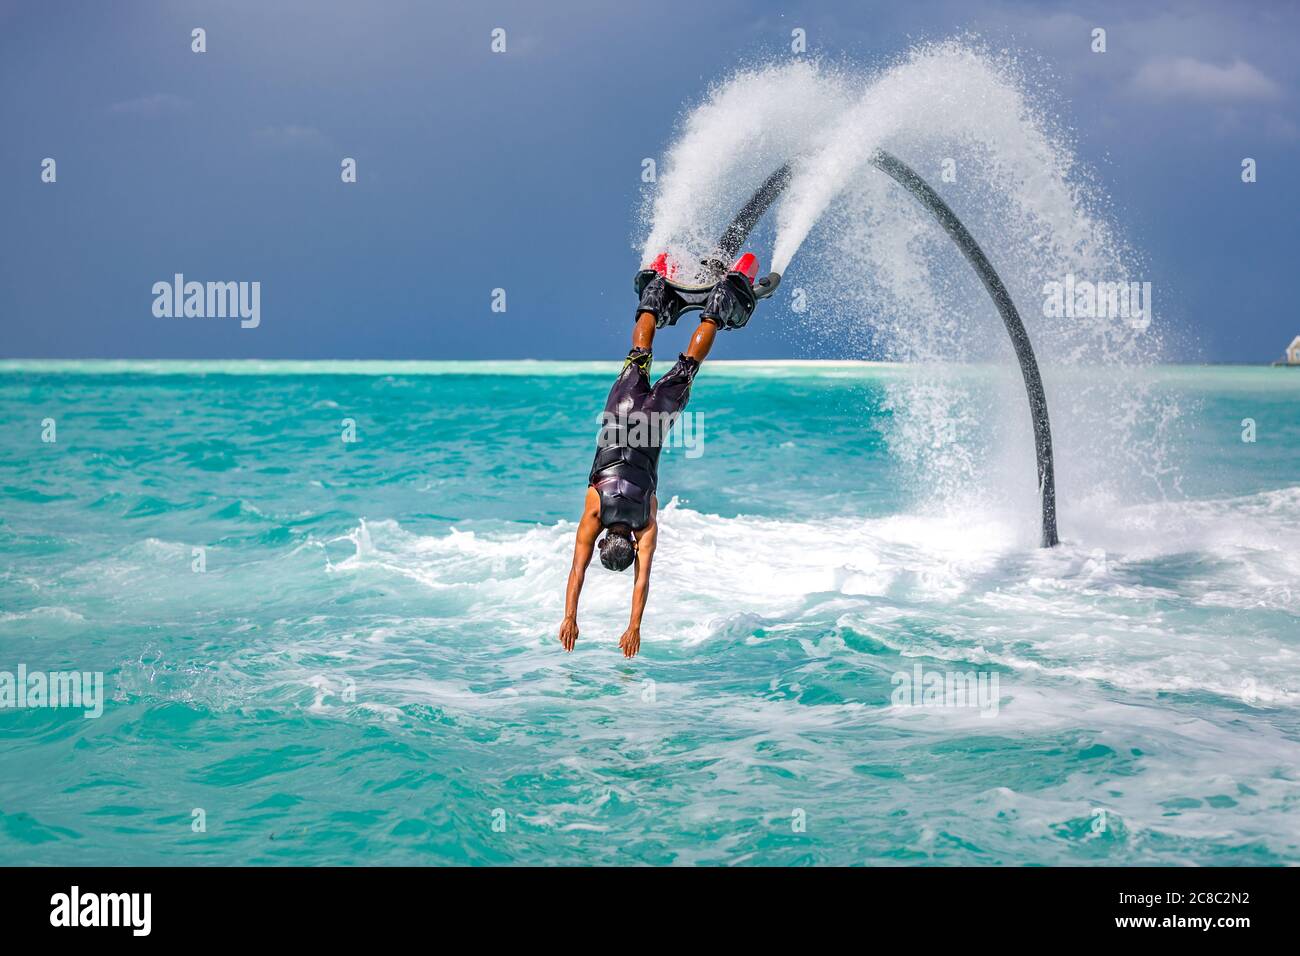 Professional pro fly board rider in tropical sea, water sports concept background. Summer vacation fun outdoor sport Stock Photo